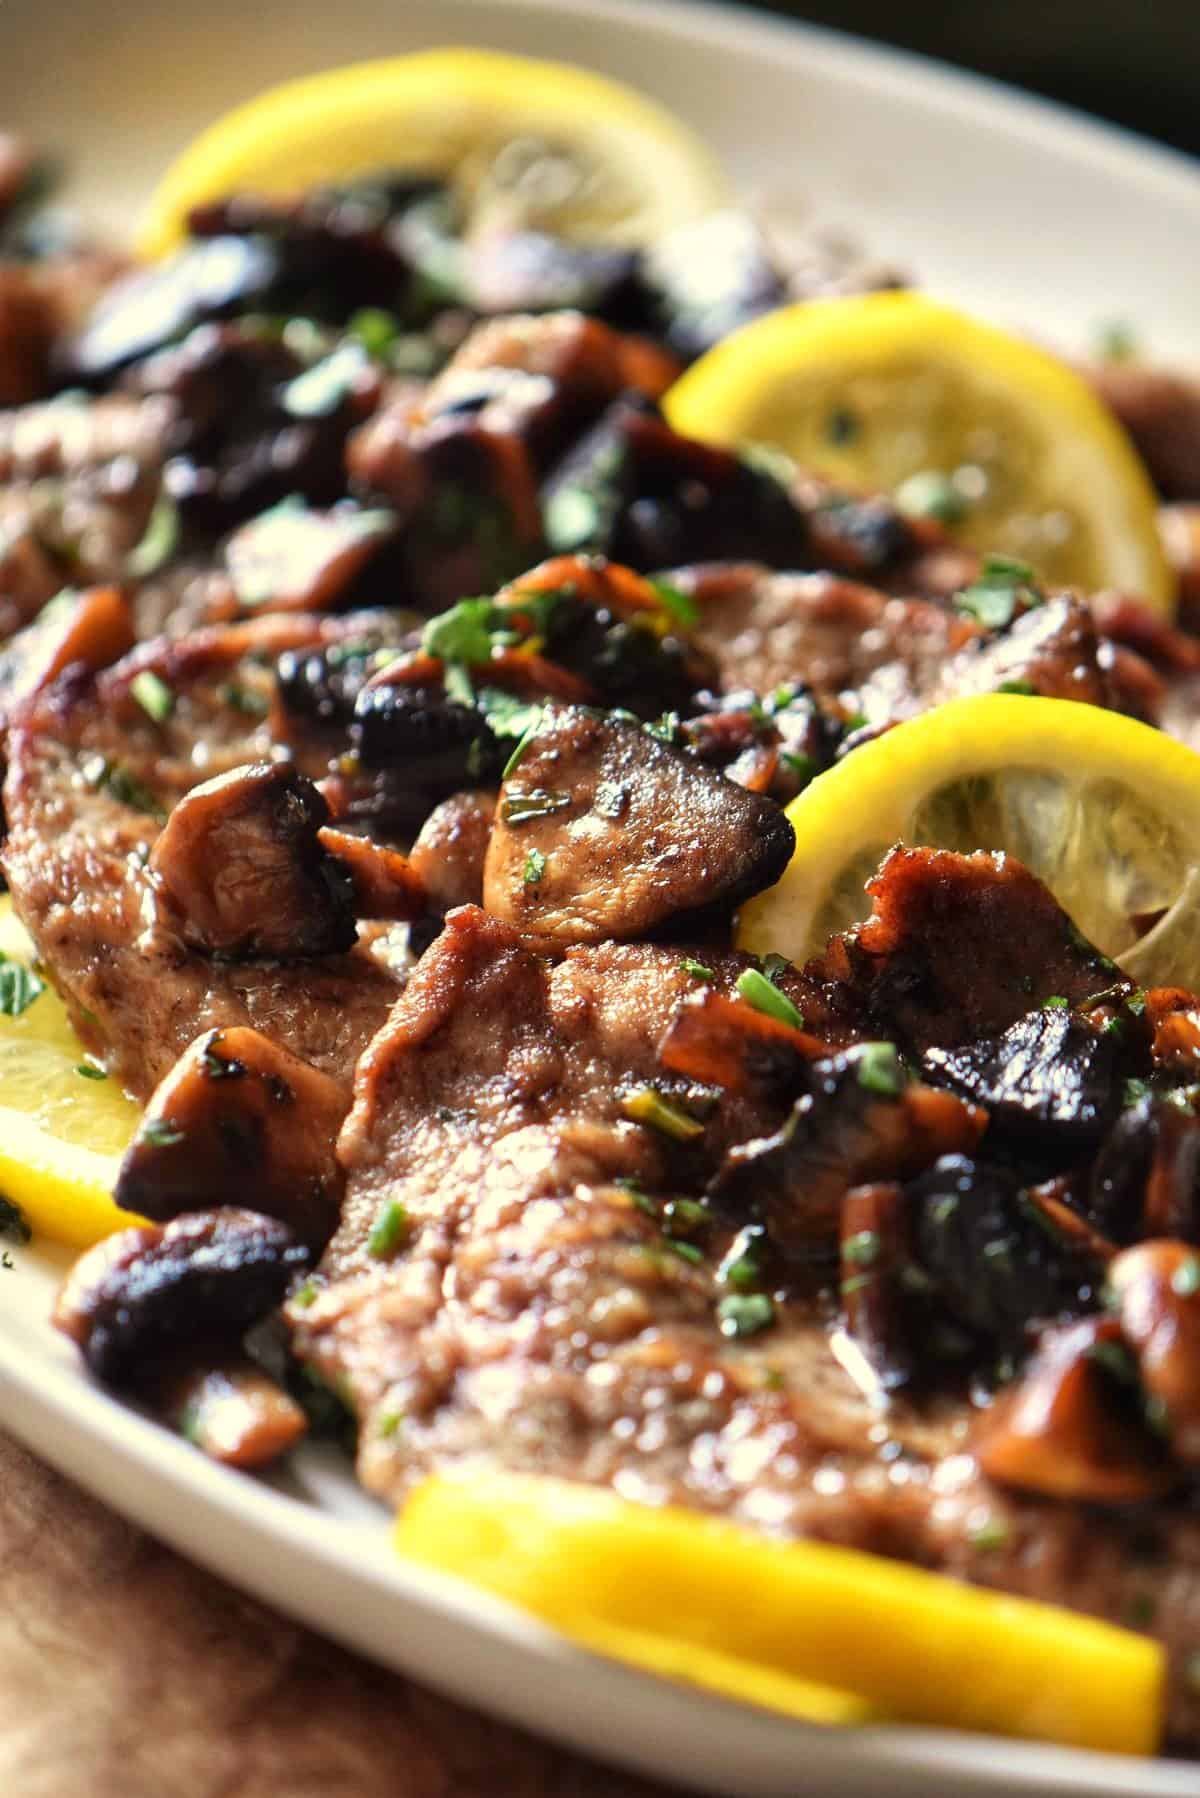 Slices of veal scallopini garnished with Italian parsley and mushrooms.